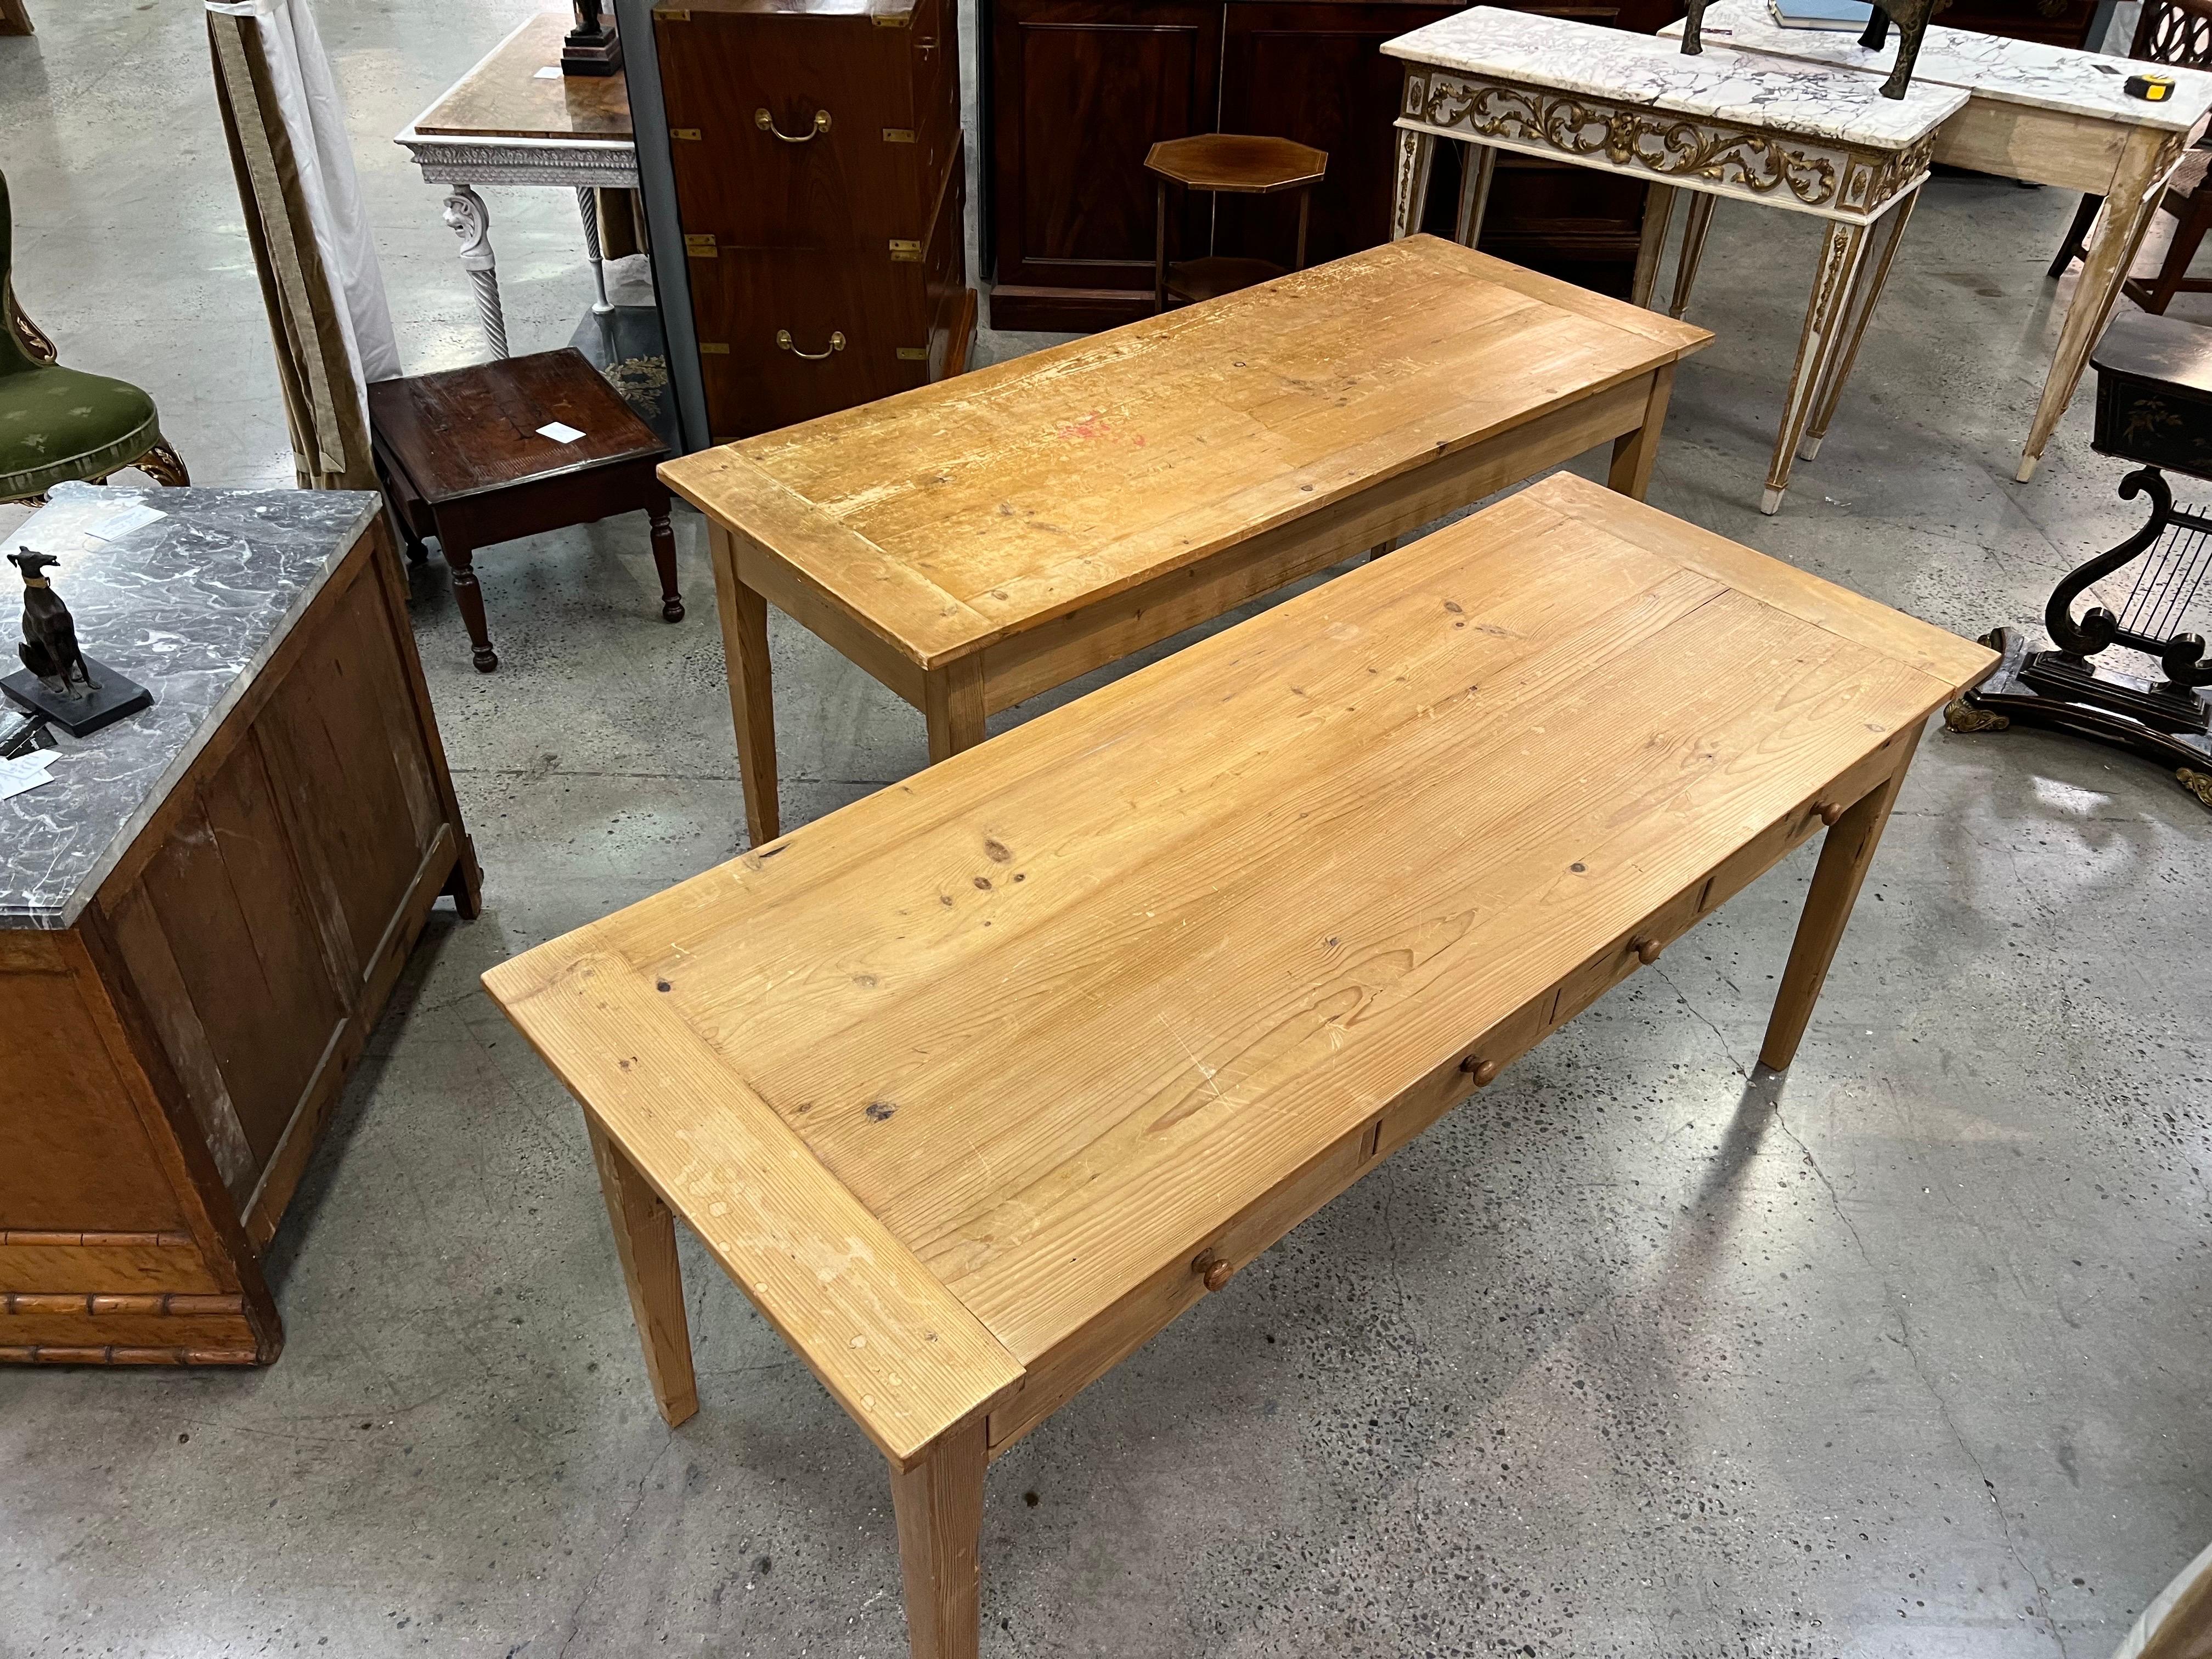 Pair of late 19th century English stripped pine tables with drawers. Sold individually or as a pair.